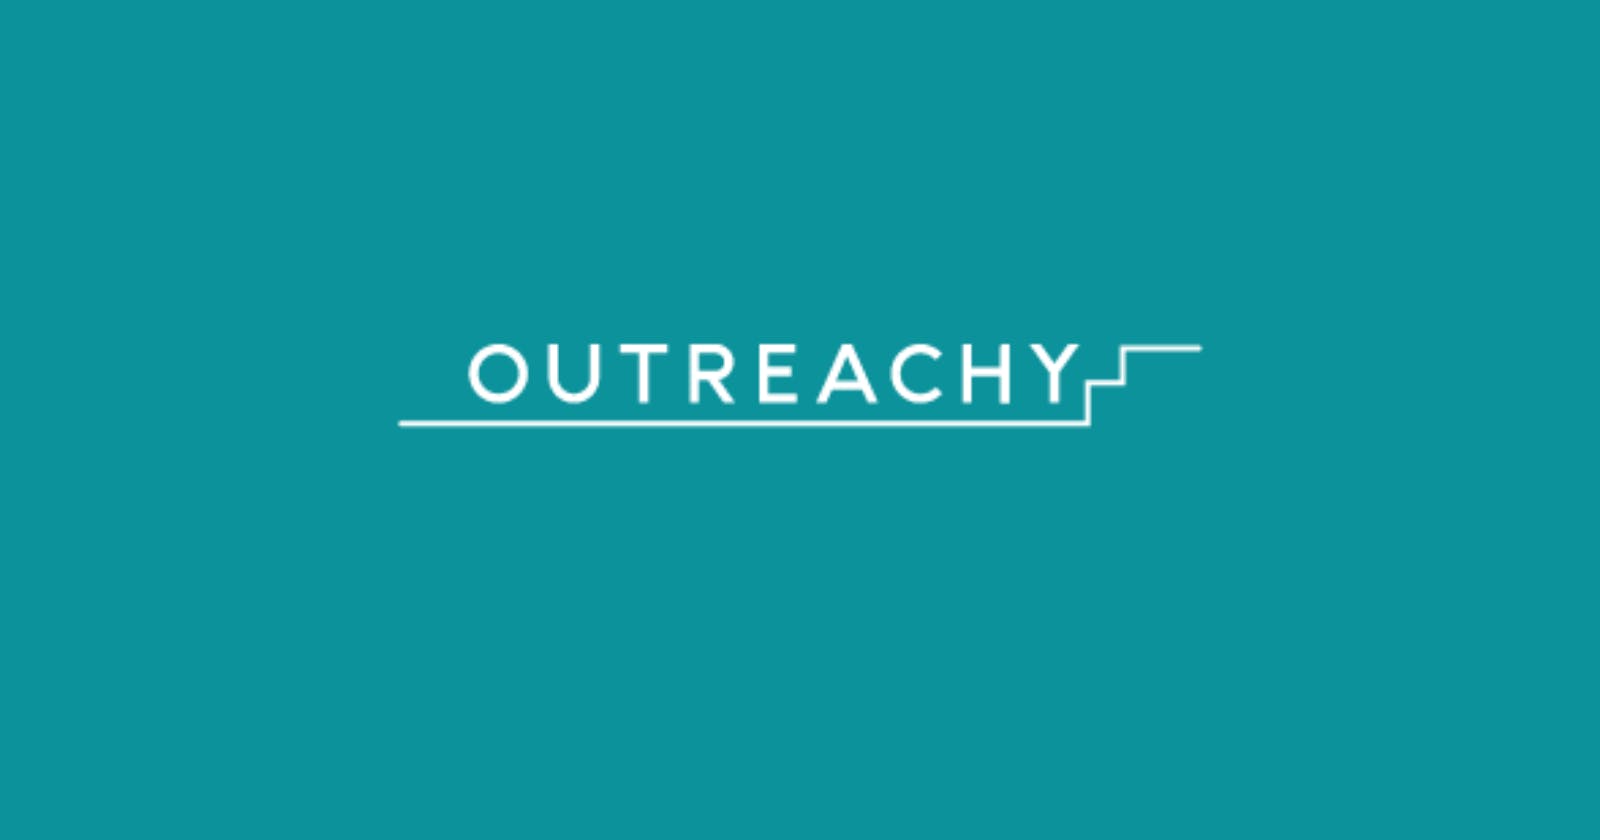 I joined Outreachy to provide value for the underrepresented population.